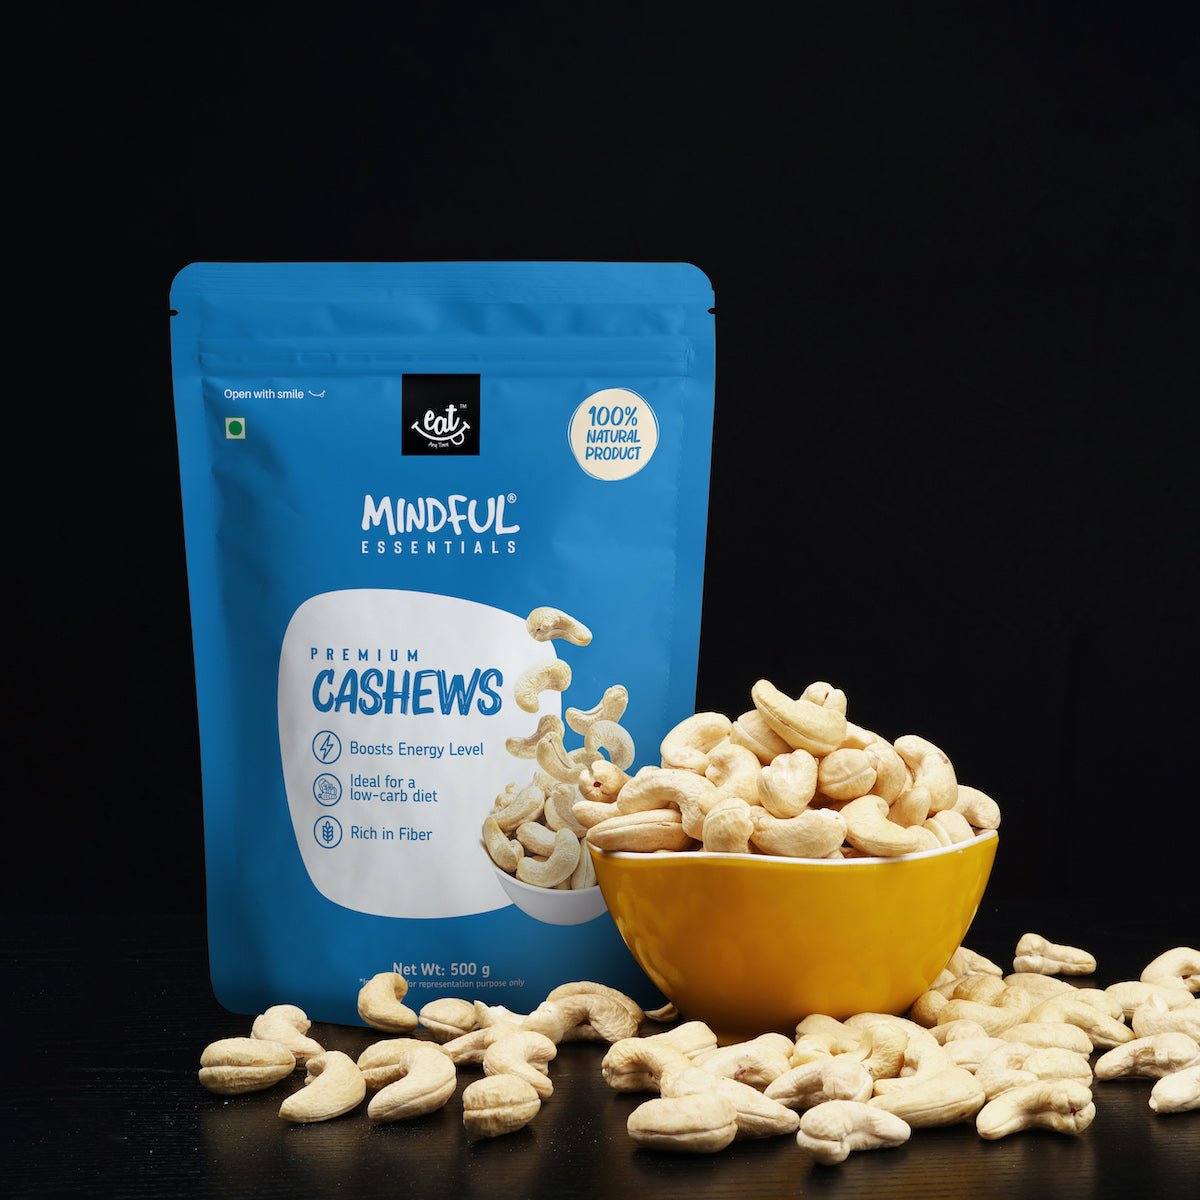 Premium Cashews to boost energy - EAT Anytime